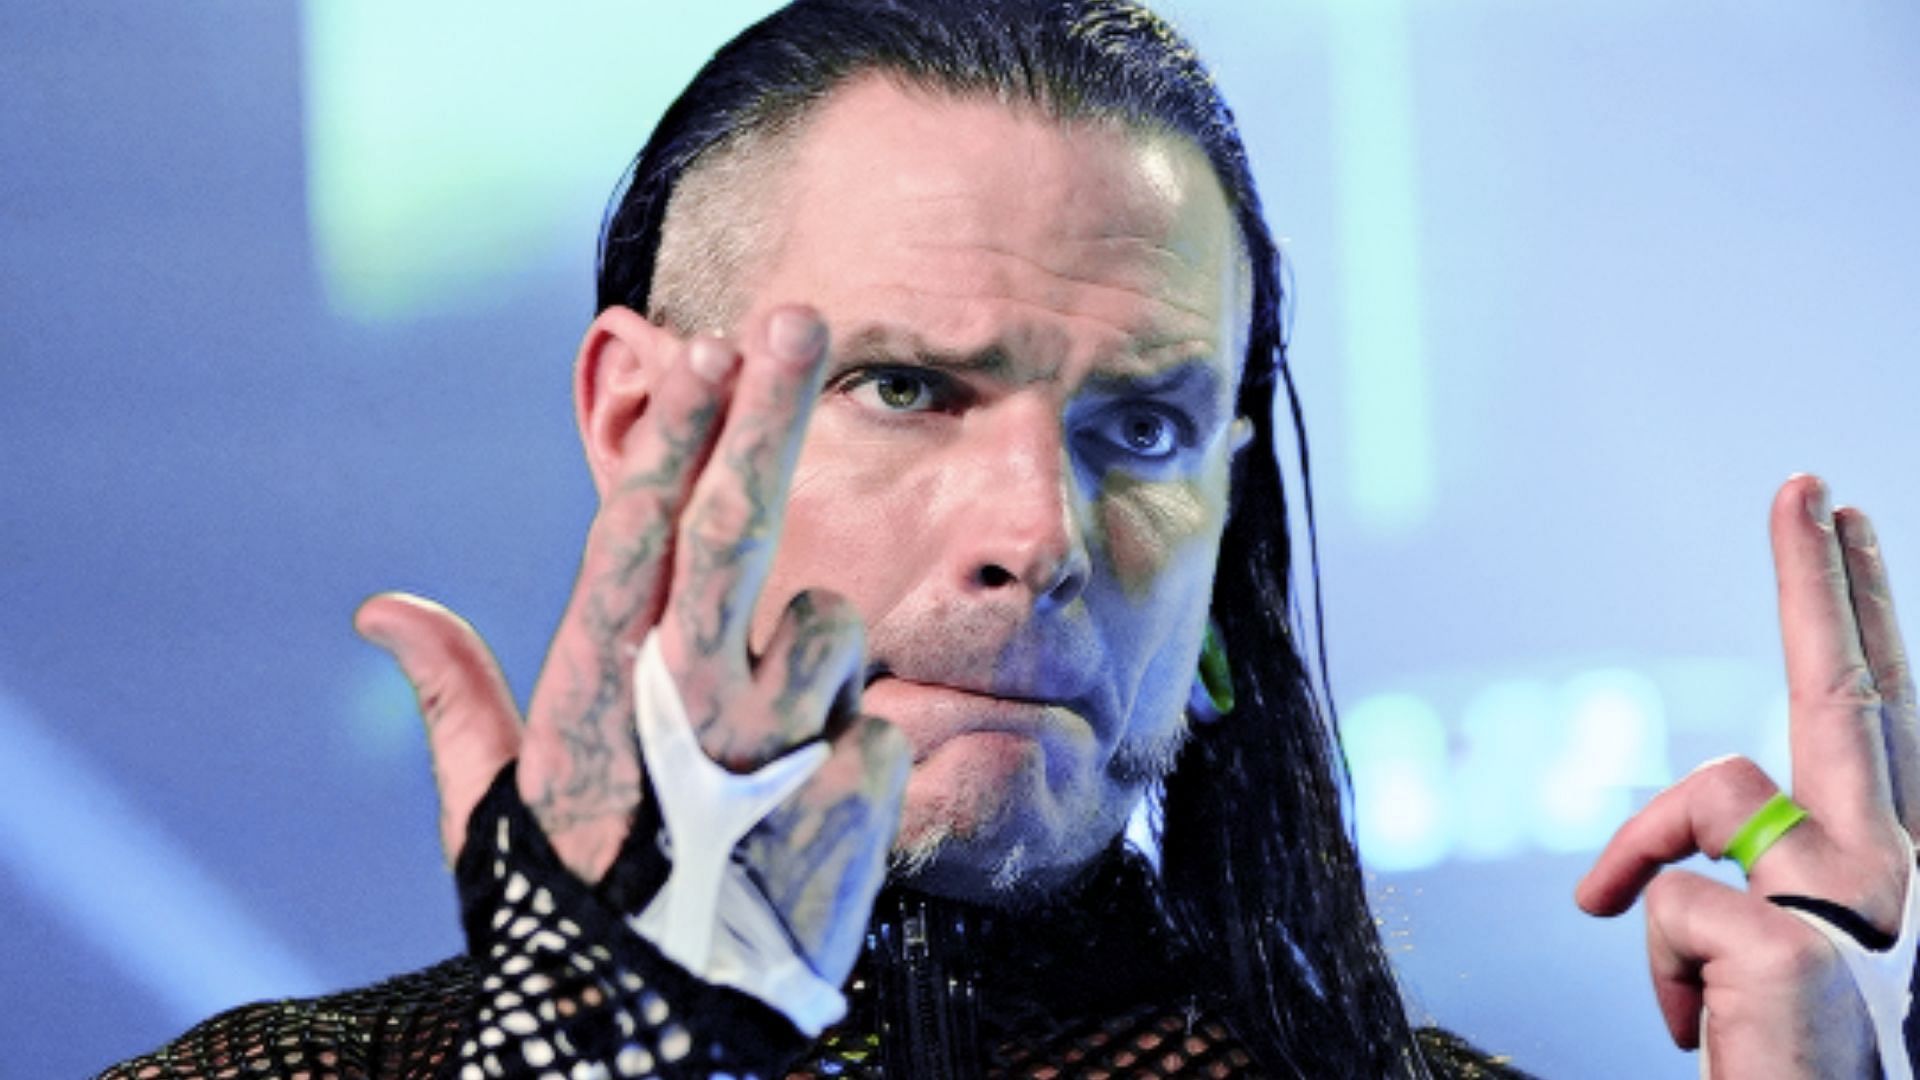 There has been an update on Jeff Hardy